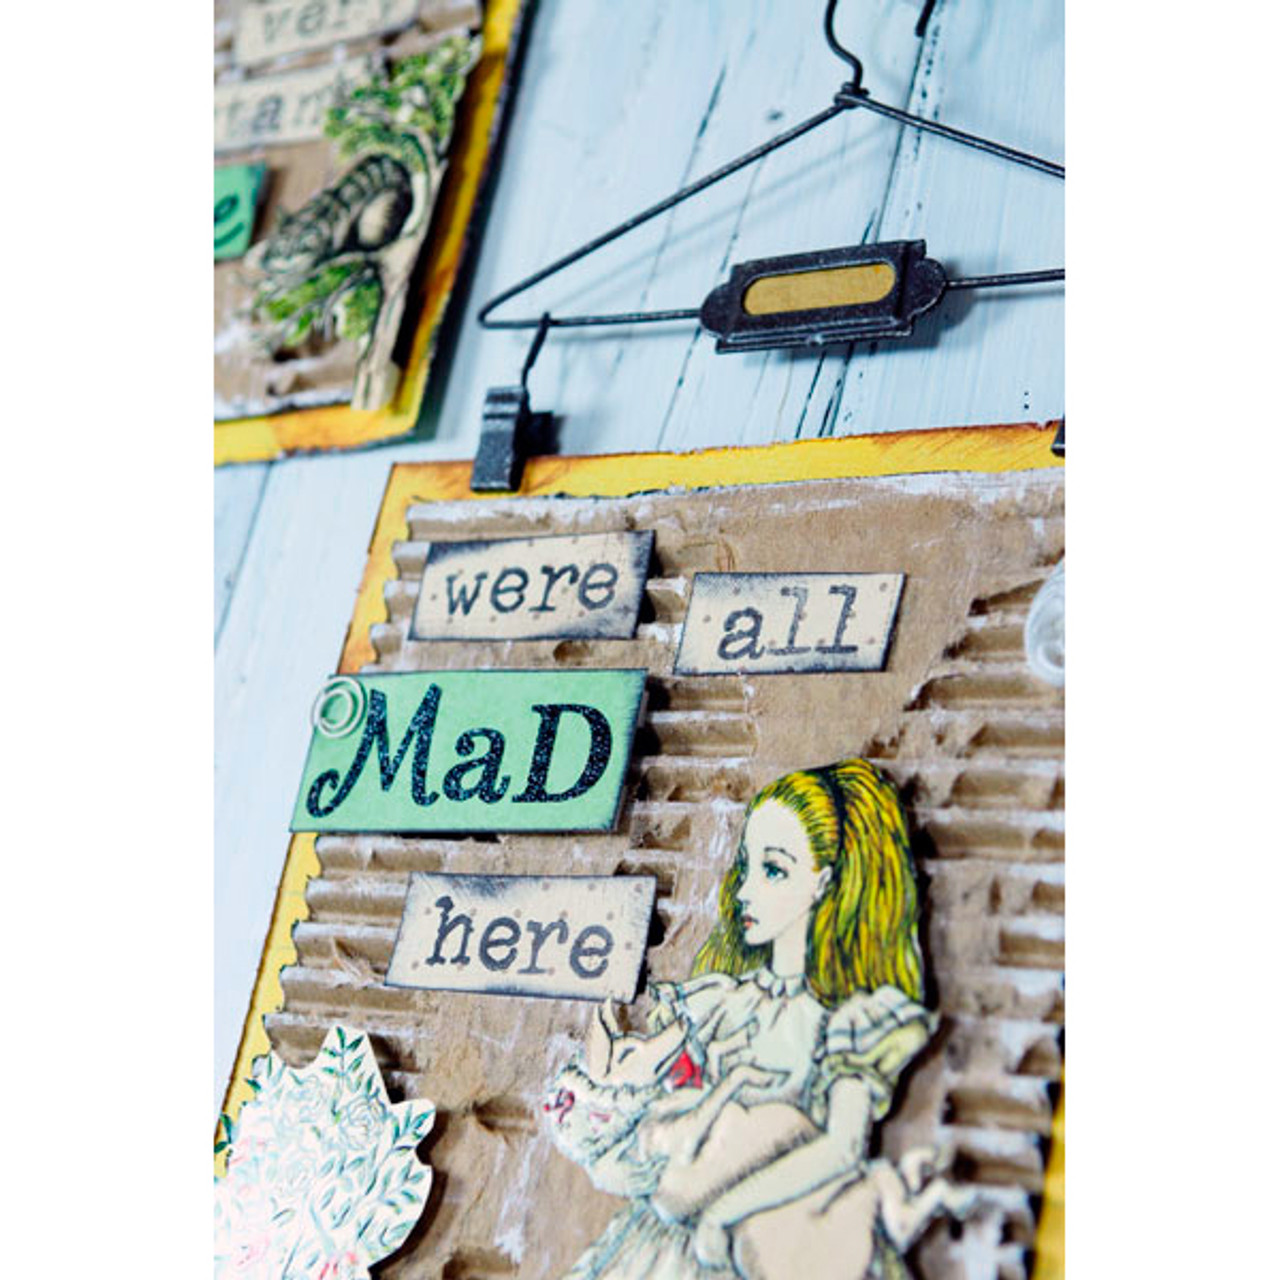 Adventures In Wonderland Wall Decor Project - Stampington & Company